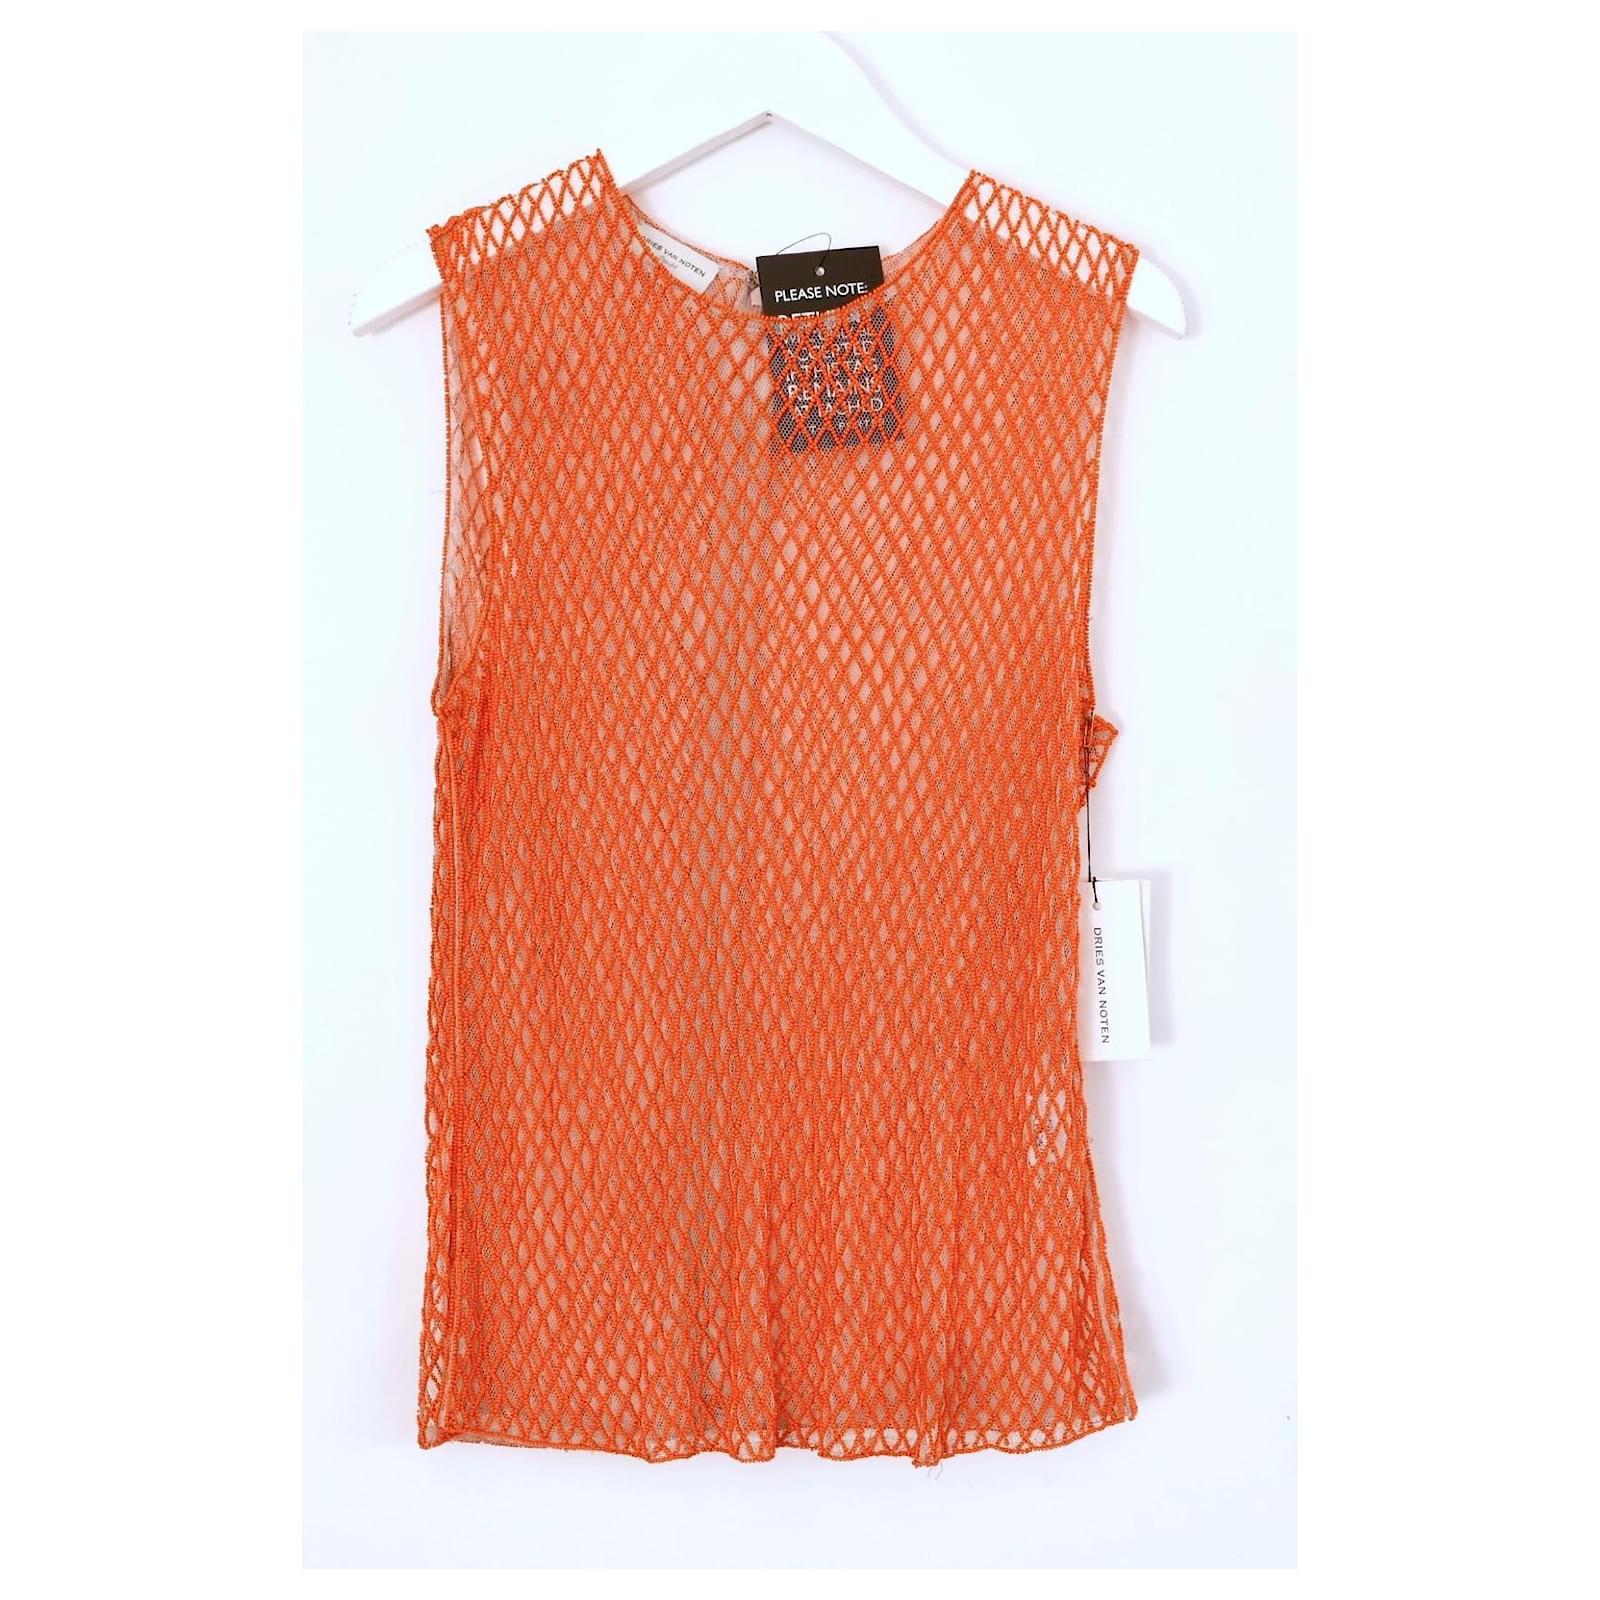 Gorgeous Dries Van Noten Centila embellished top from the SS19 Collection. Bought for $1200 and new with tags and spare beads. Has a soft nude tulle base with bright orange beaded latticing throughout. Has low cut arm holes, slit hem and long zip to